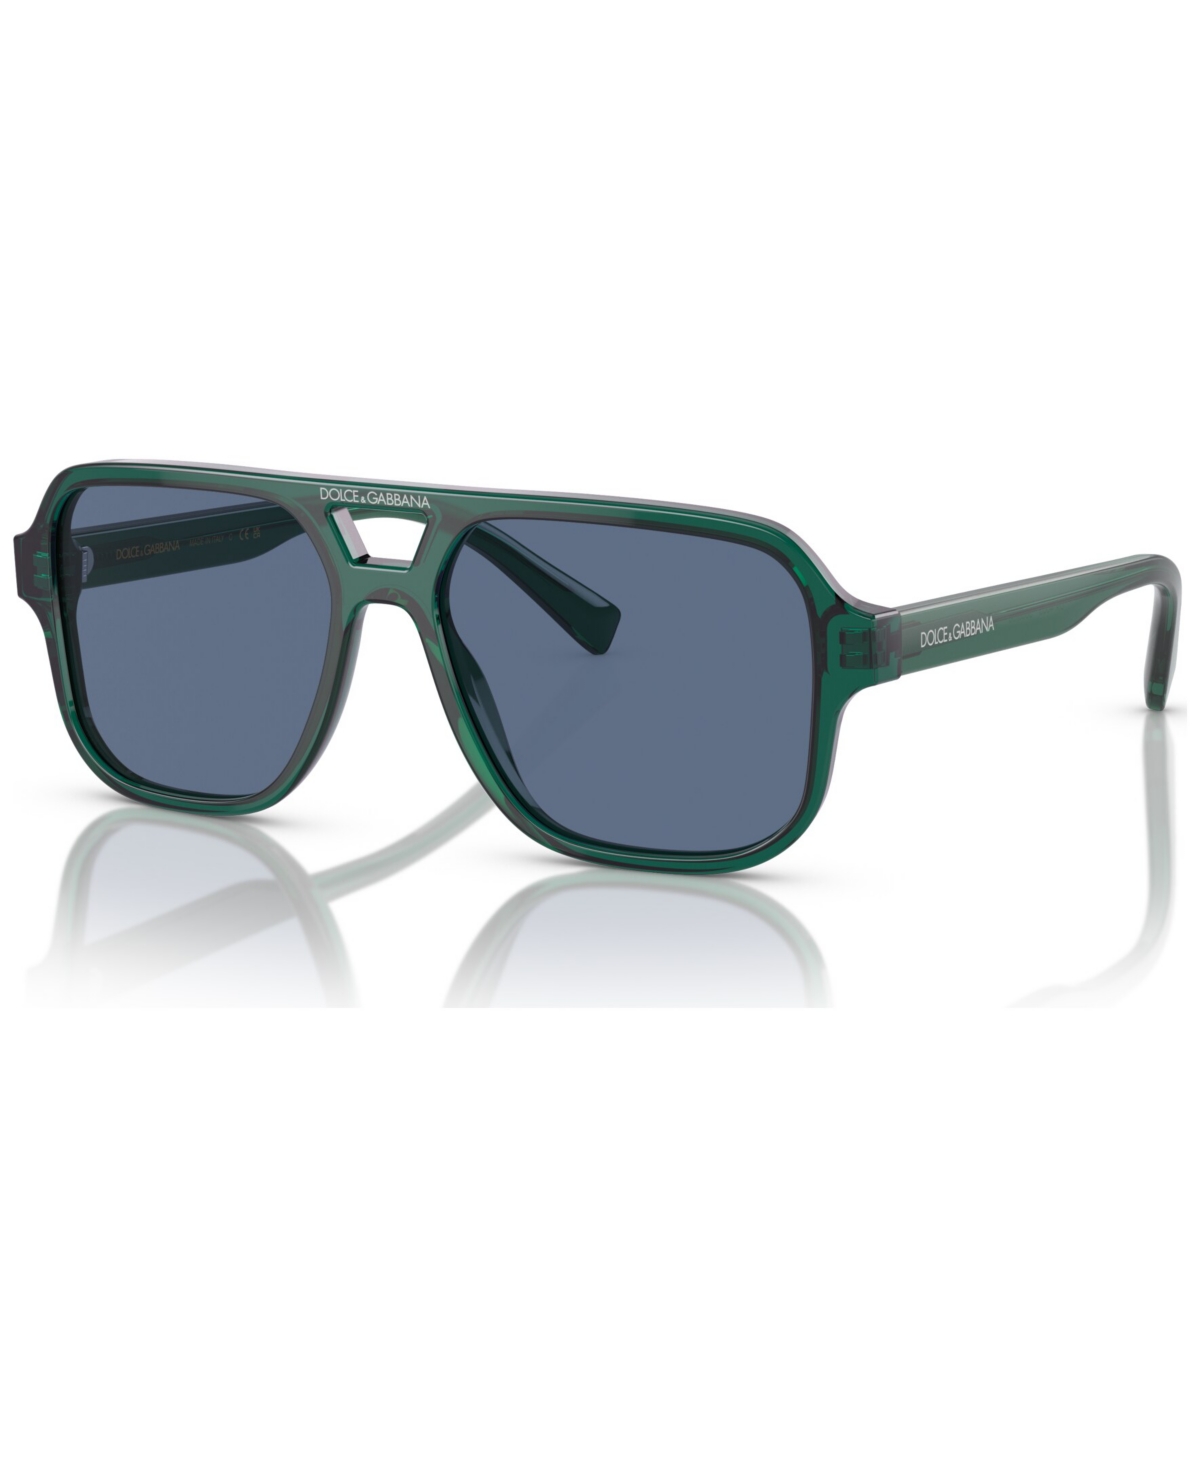 Dolce & Gabbana Kids Sunglasses, 0dx4003 (ages 7-10) In Green